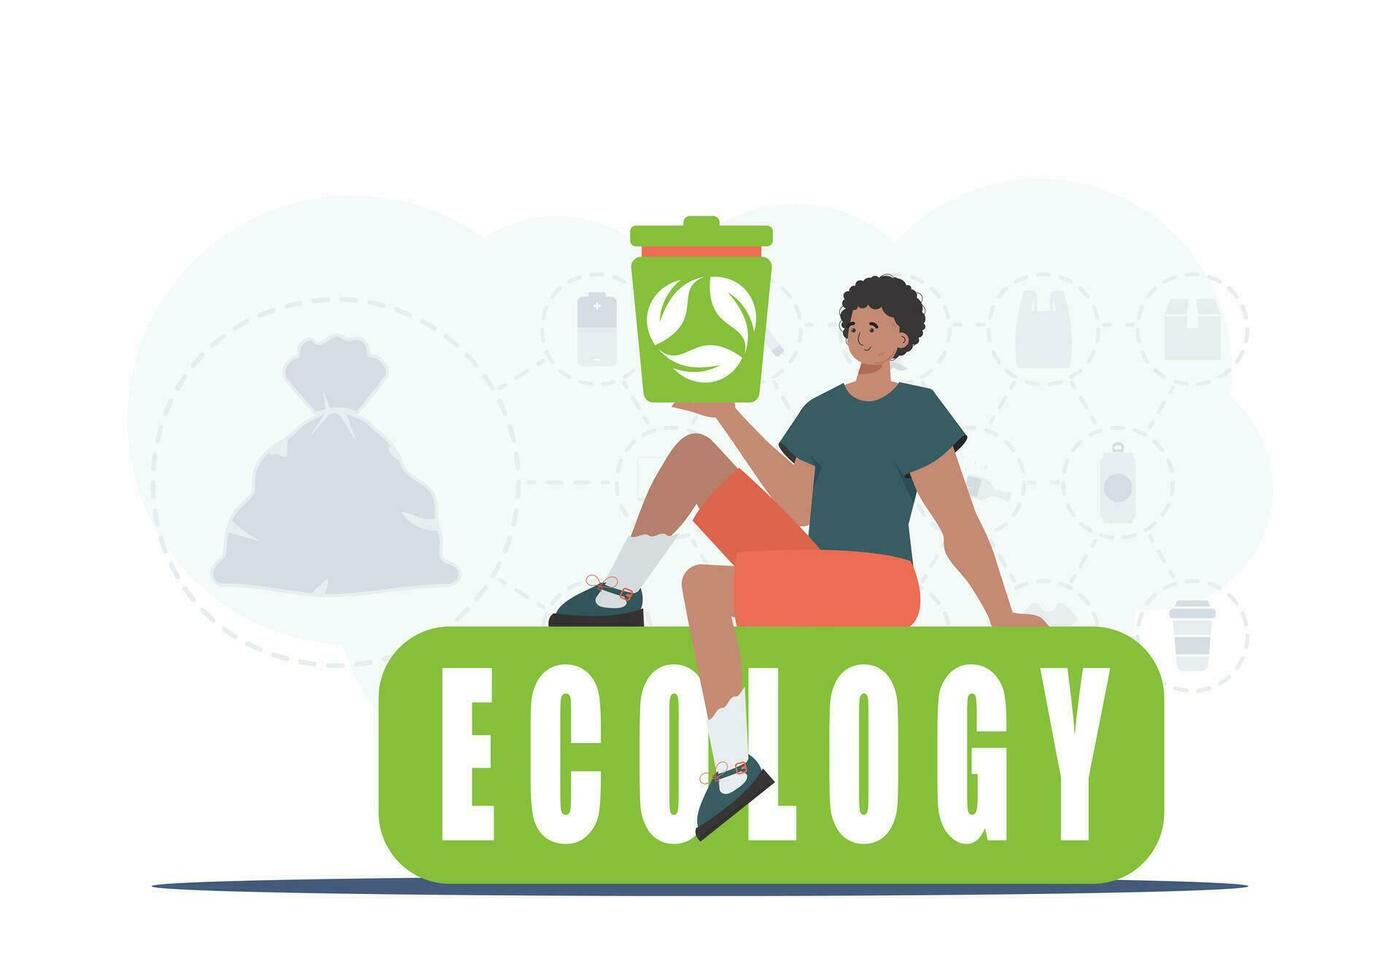 The guy sits and holds a trash can in his hand. The concept of ecology and recycling. Vector illustration Flat trendy style.